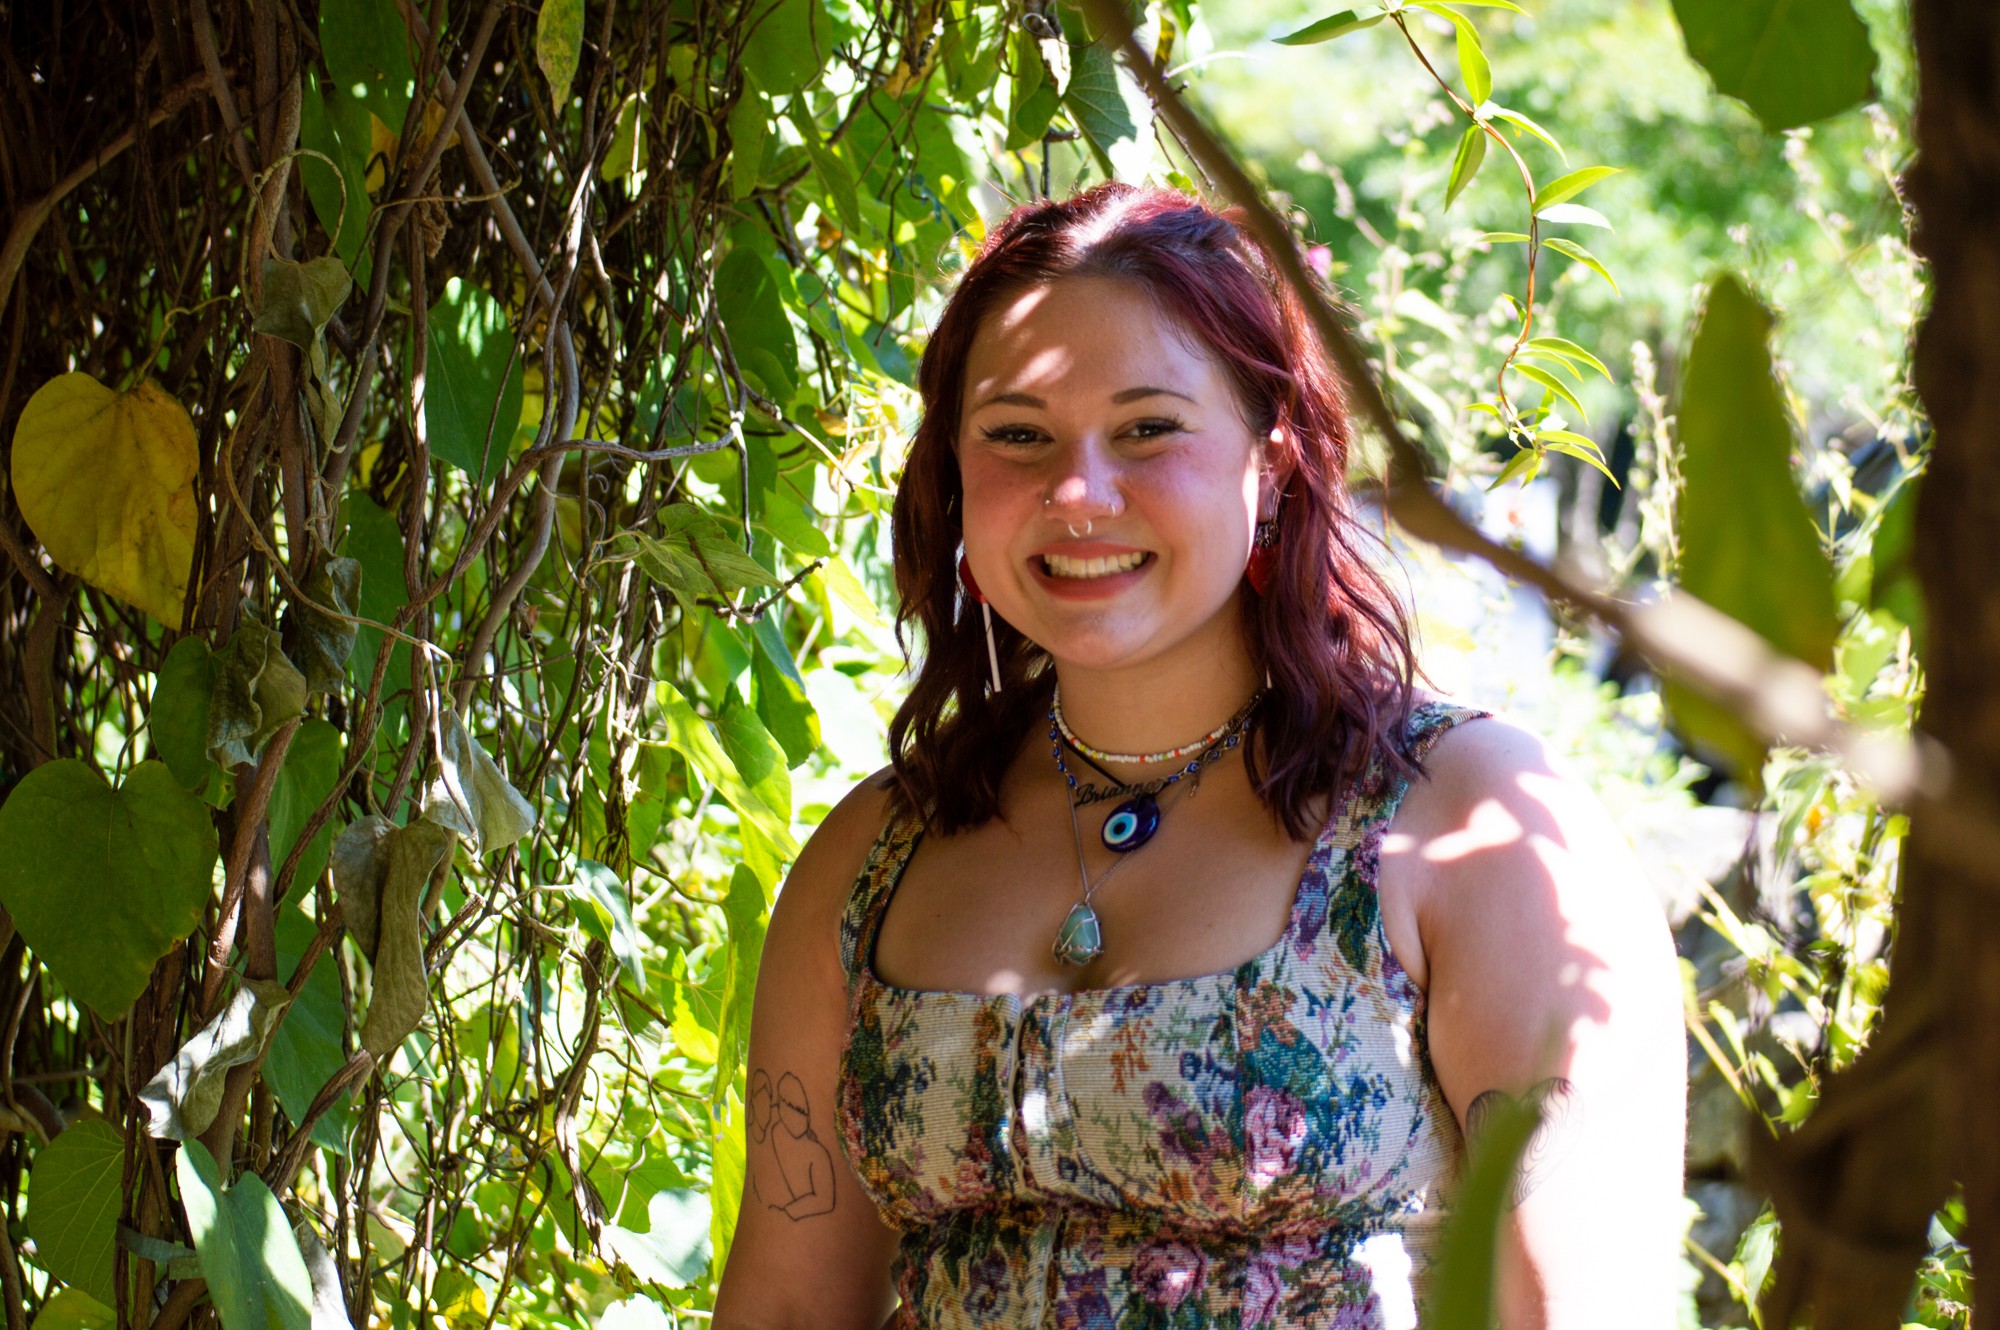 Portrait of Brianna Brigman, a sophomore at UNC, in nature. She has red hair and a floral dress.